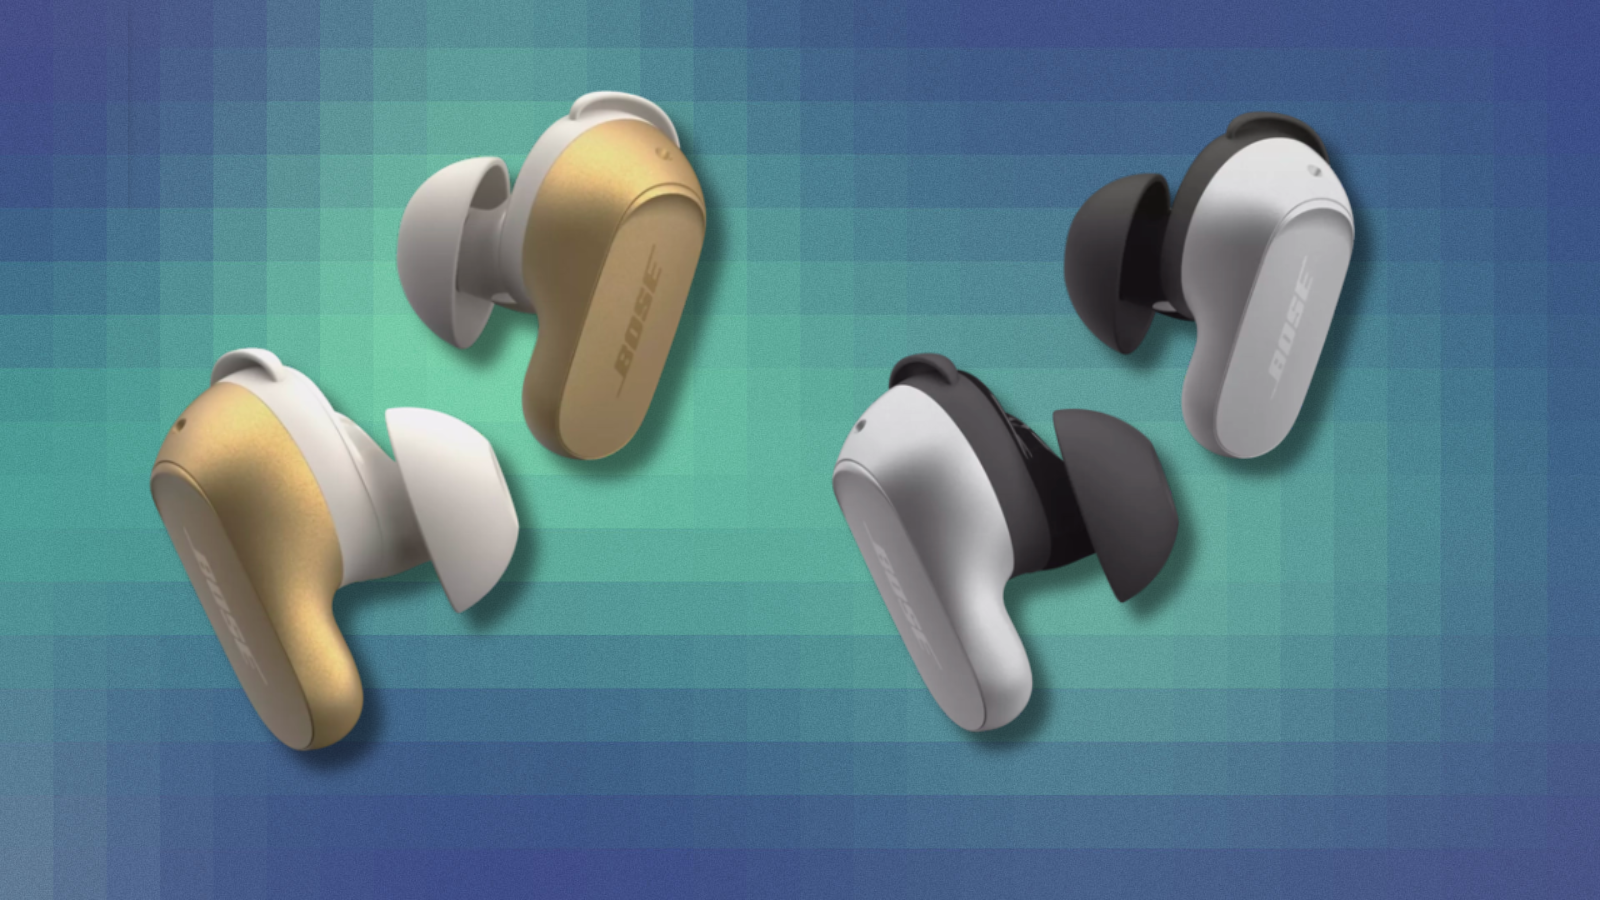 Gold and silver Bose QuietComfort Earbuds on colorful abstract background